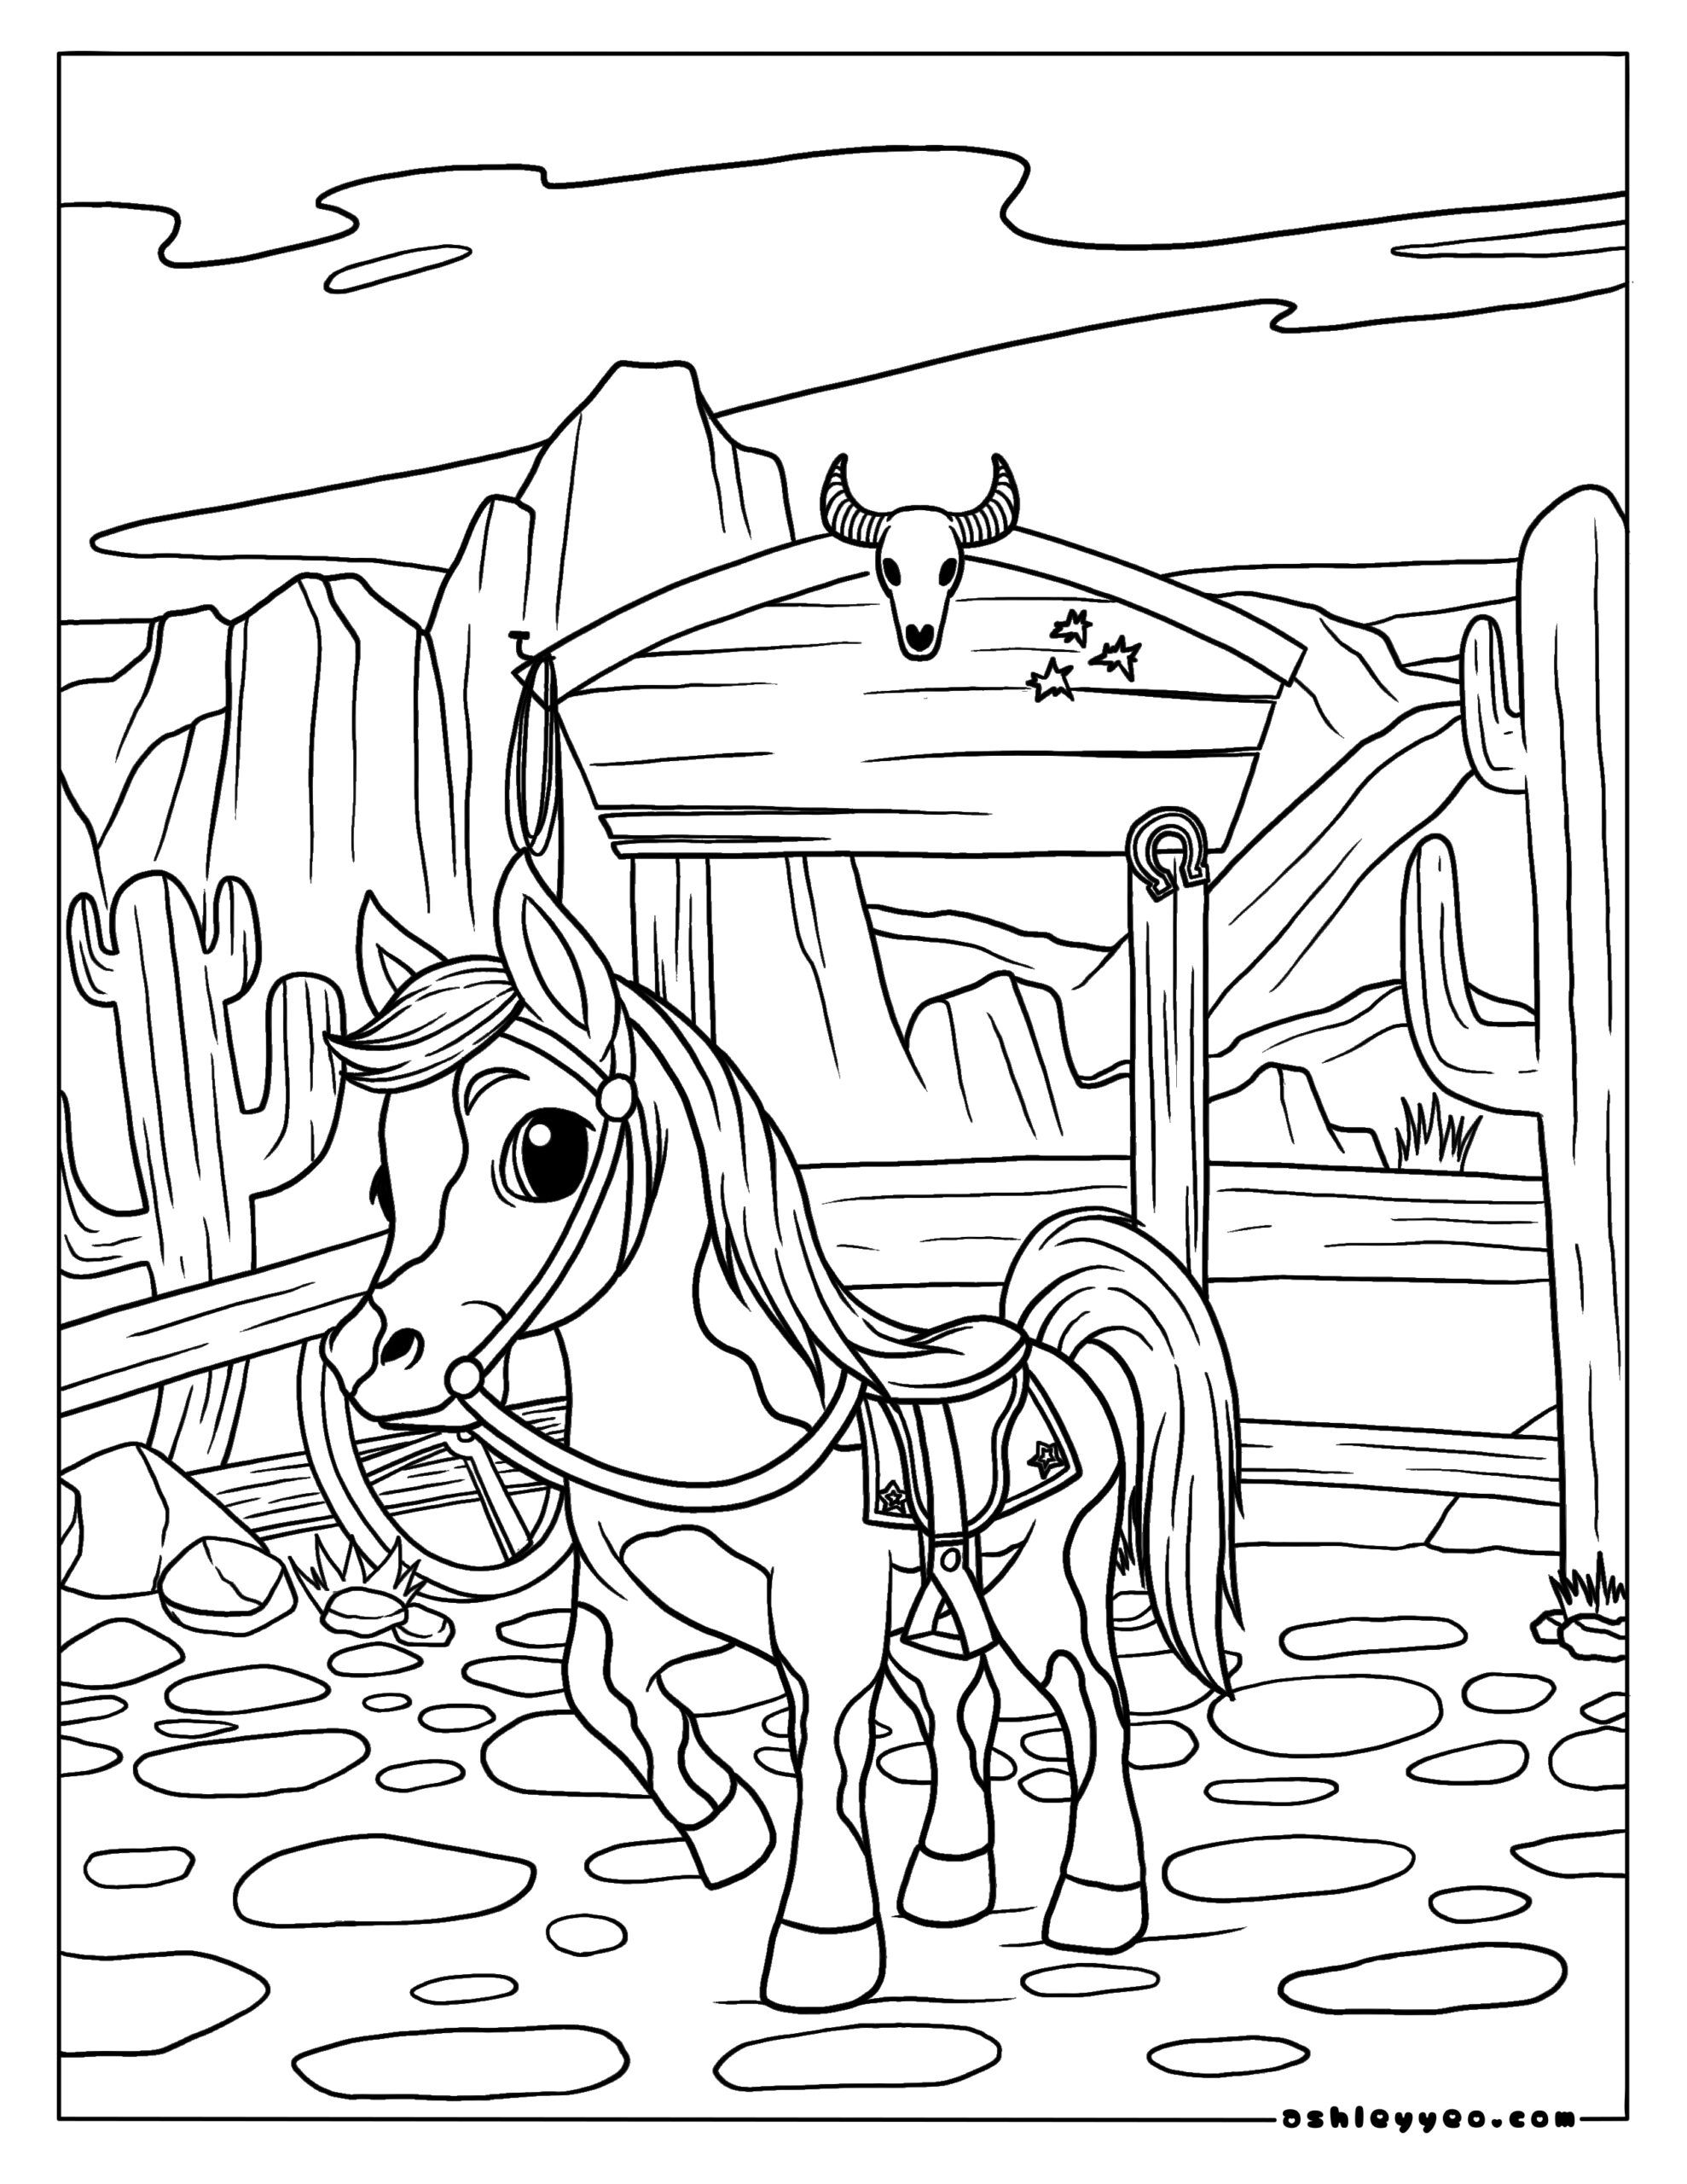 Free western coloring pages for kids